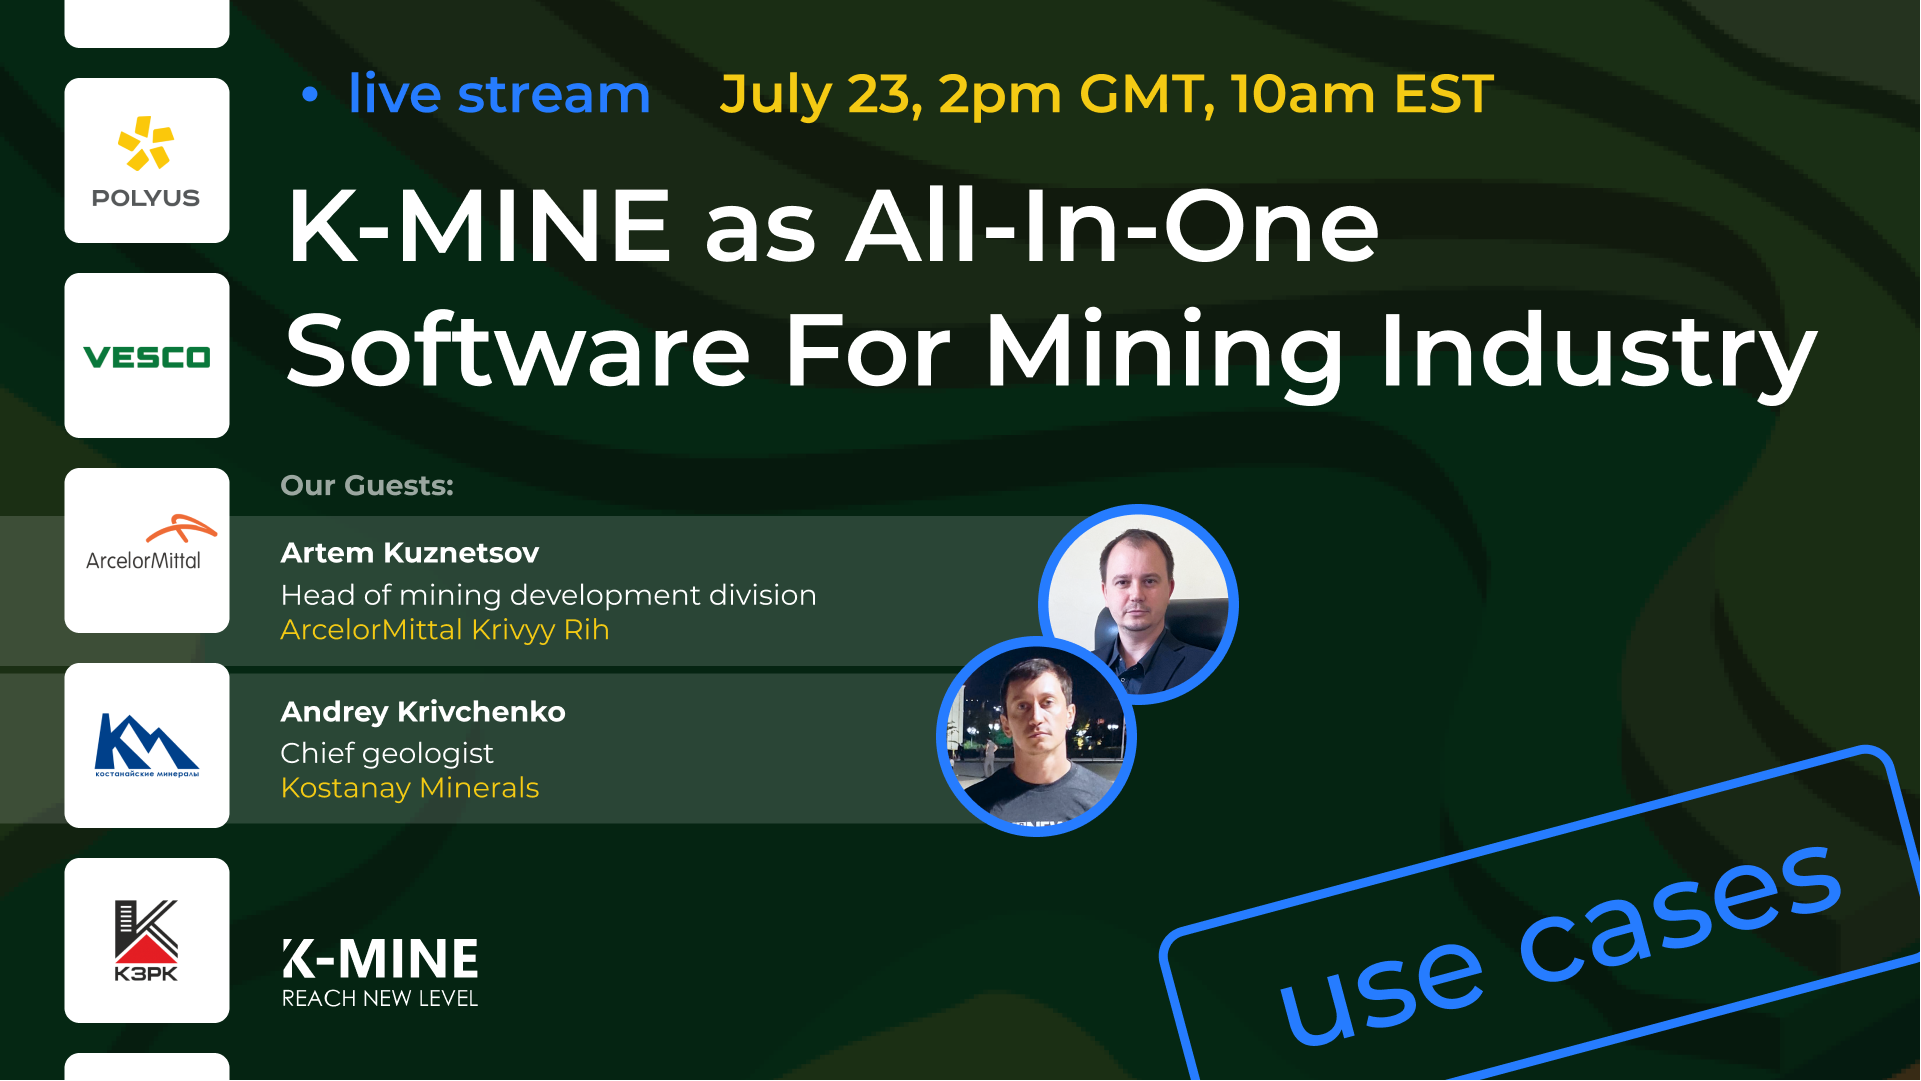 Live Stream: K-MINE as All-In-One Software For Mining Industry